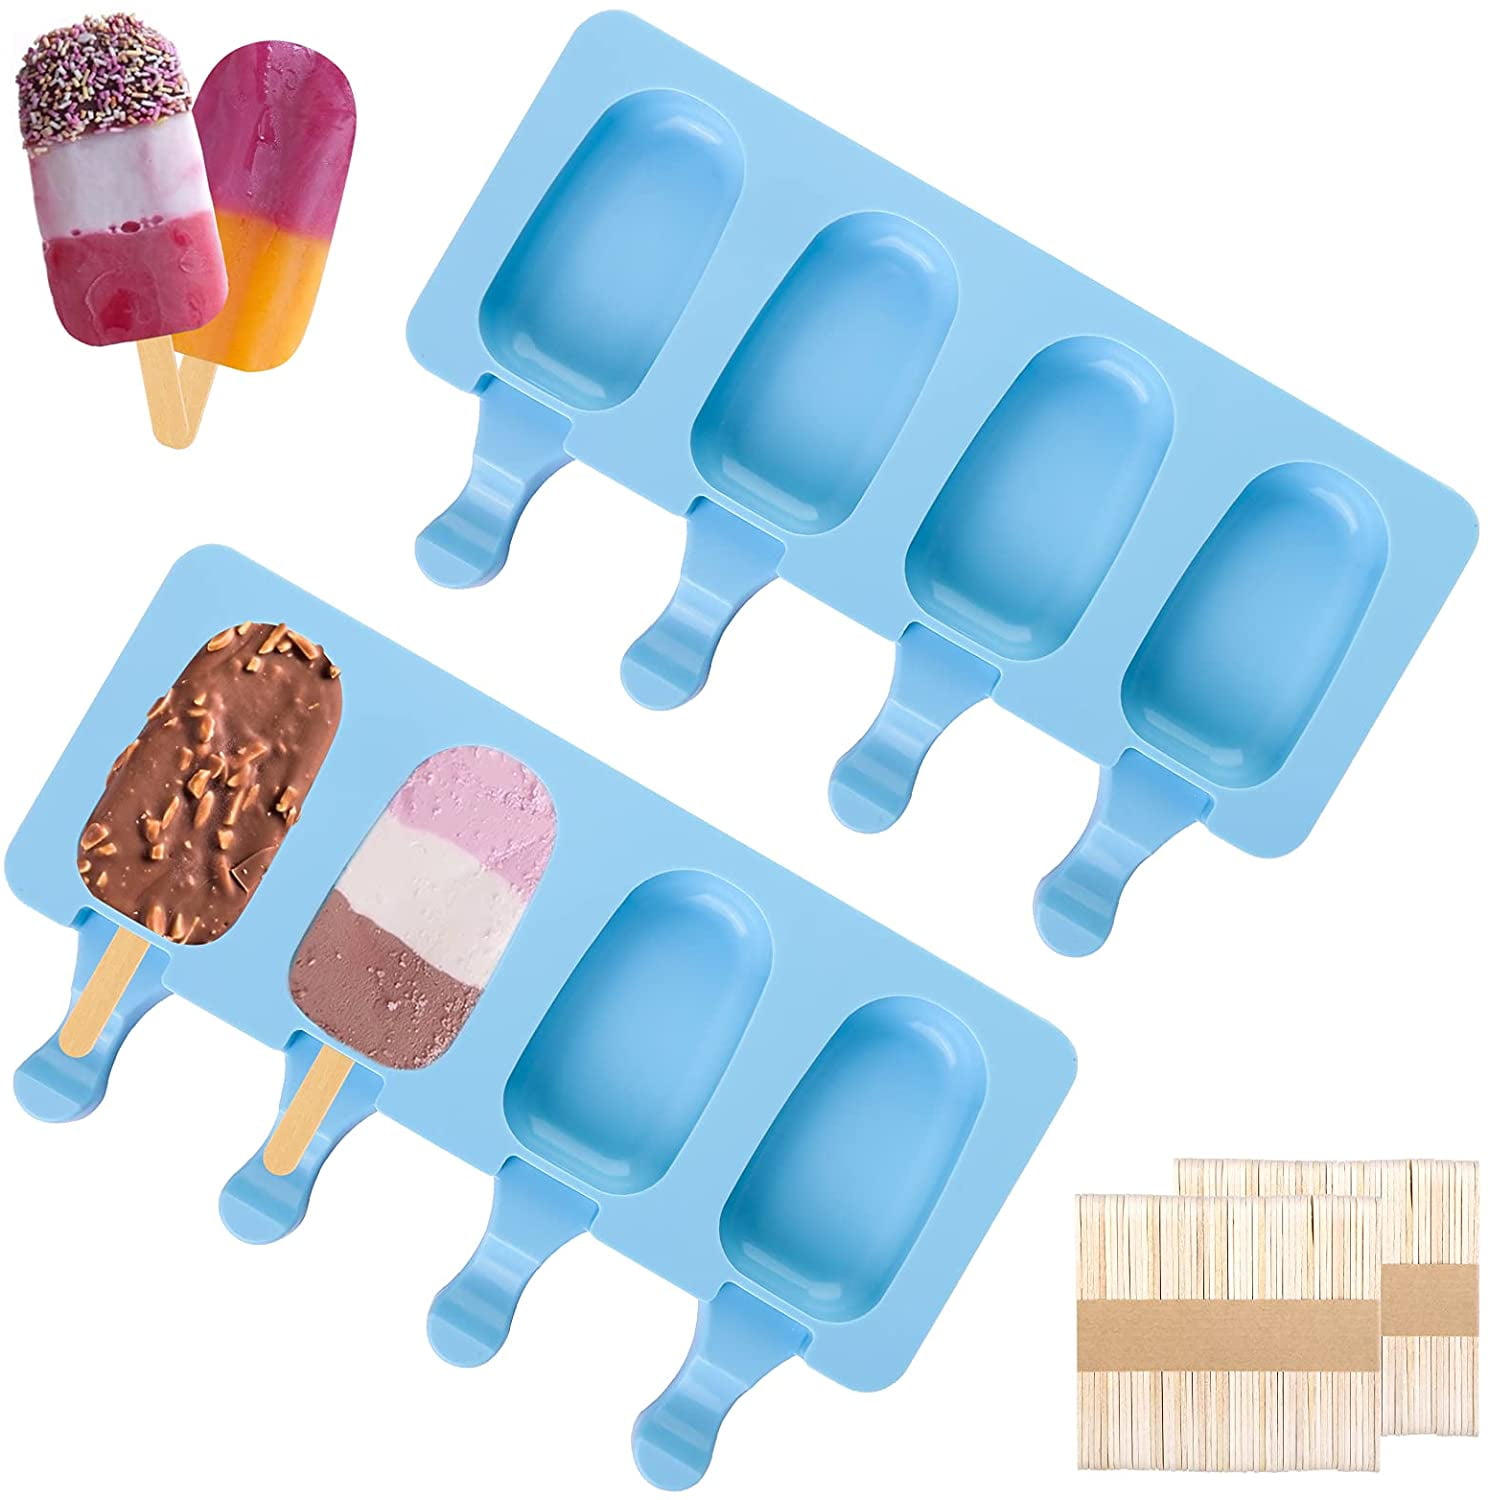 Silicone Popsicle Molds Reusable Ice Pop Molds Trays Ice Cream DIY Pop Makers 